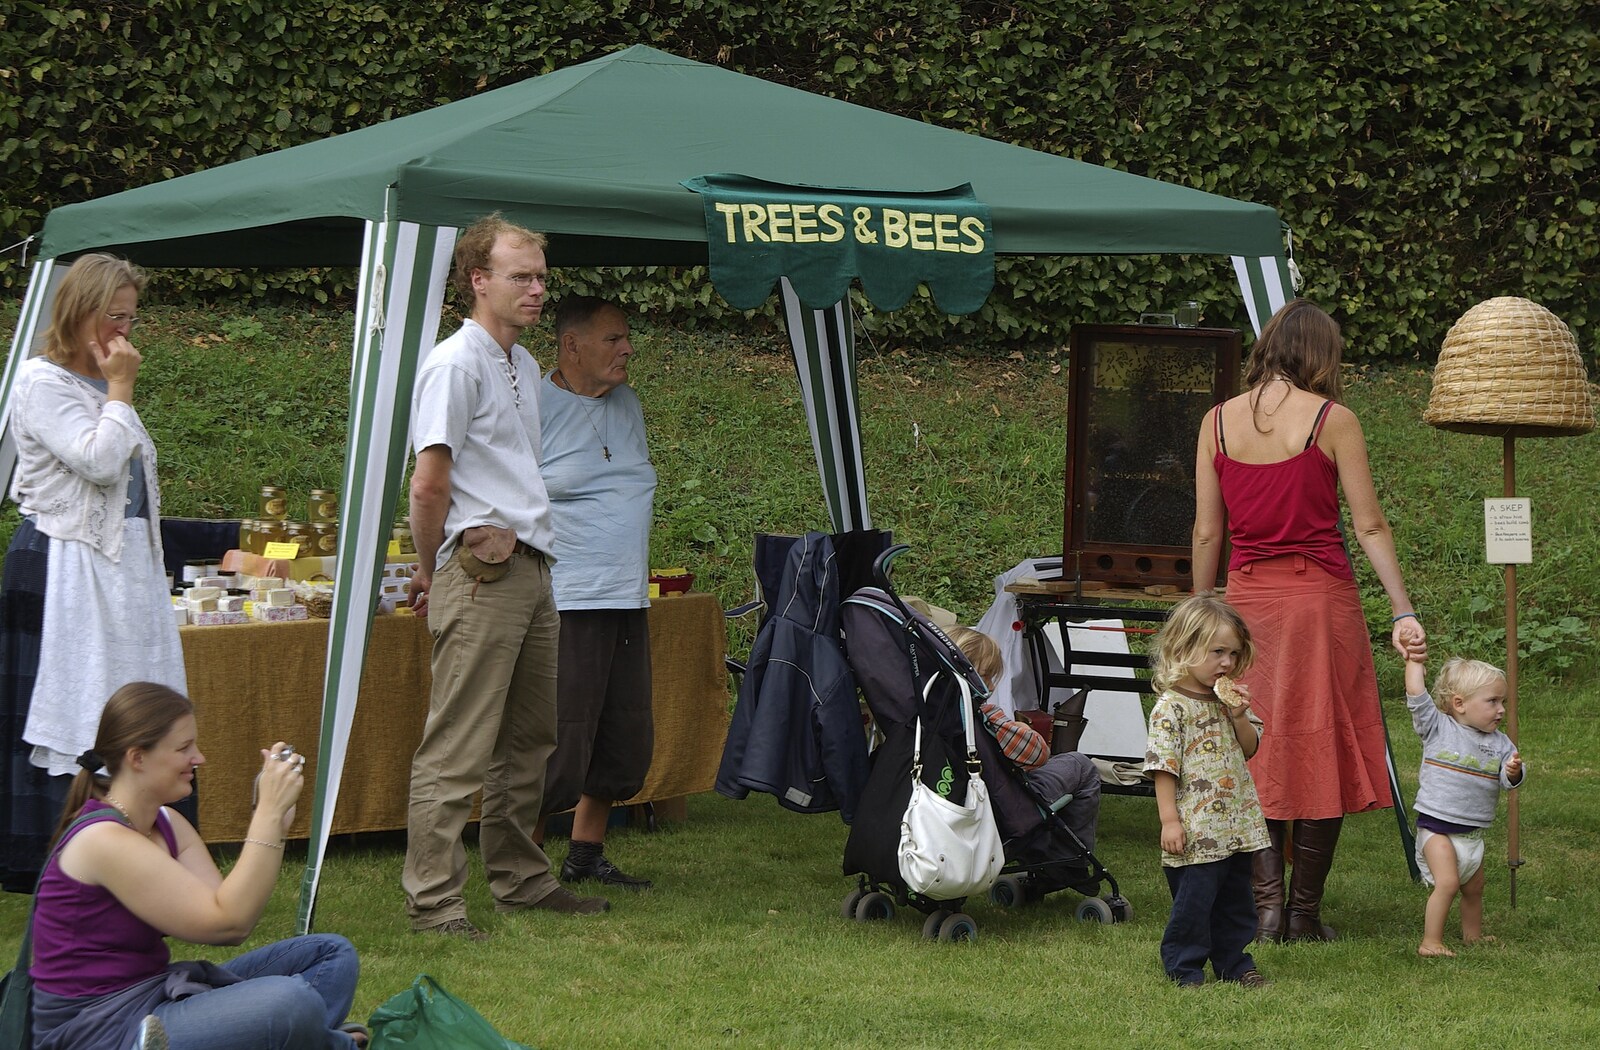 Stourbridge Fair at the Leper Chapel, Cambridge - 8th September 2007: There's an active bee hive at the bee gazebo